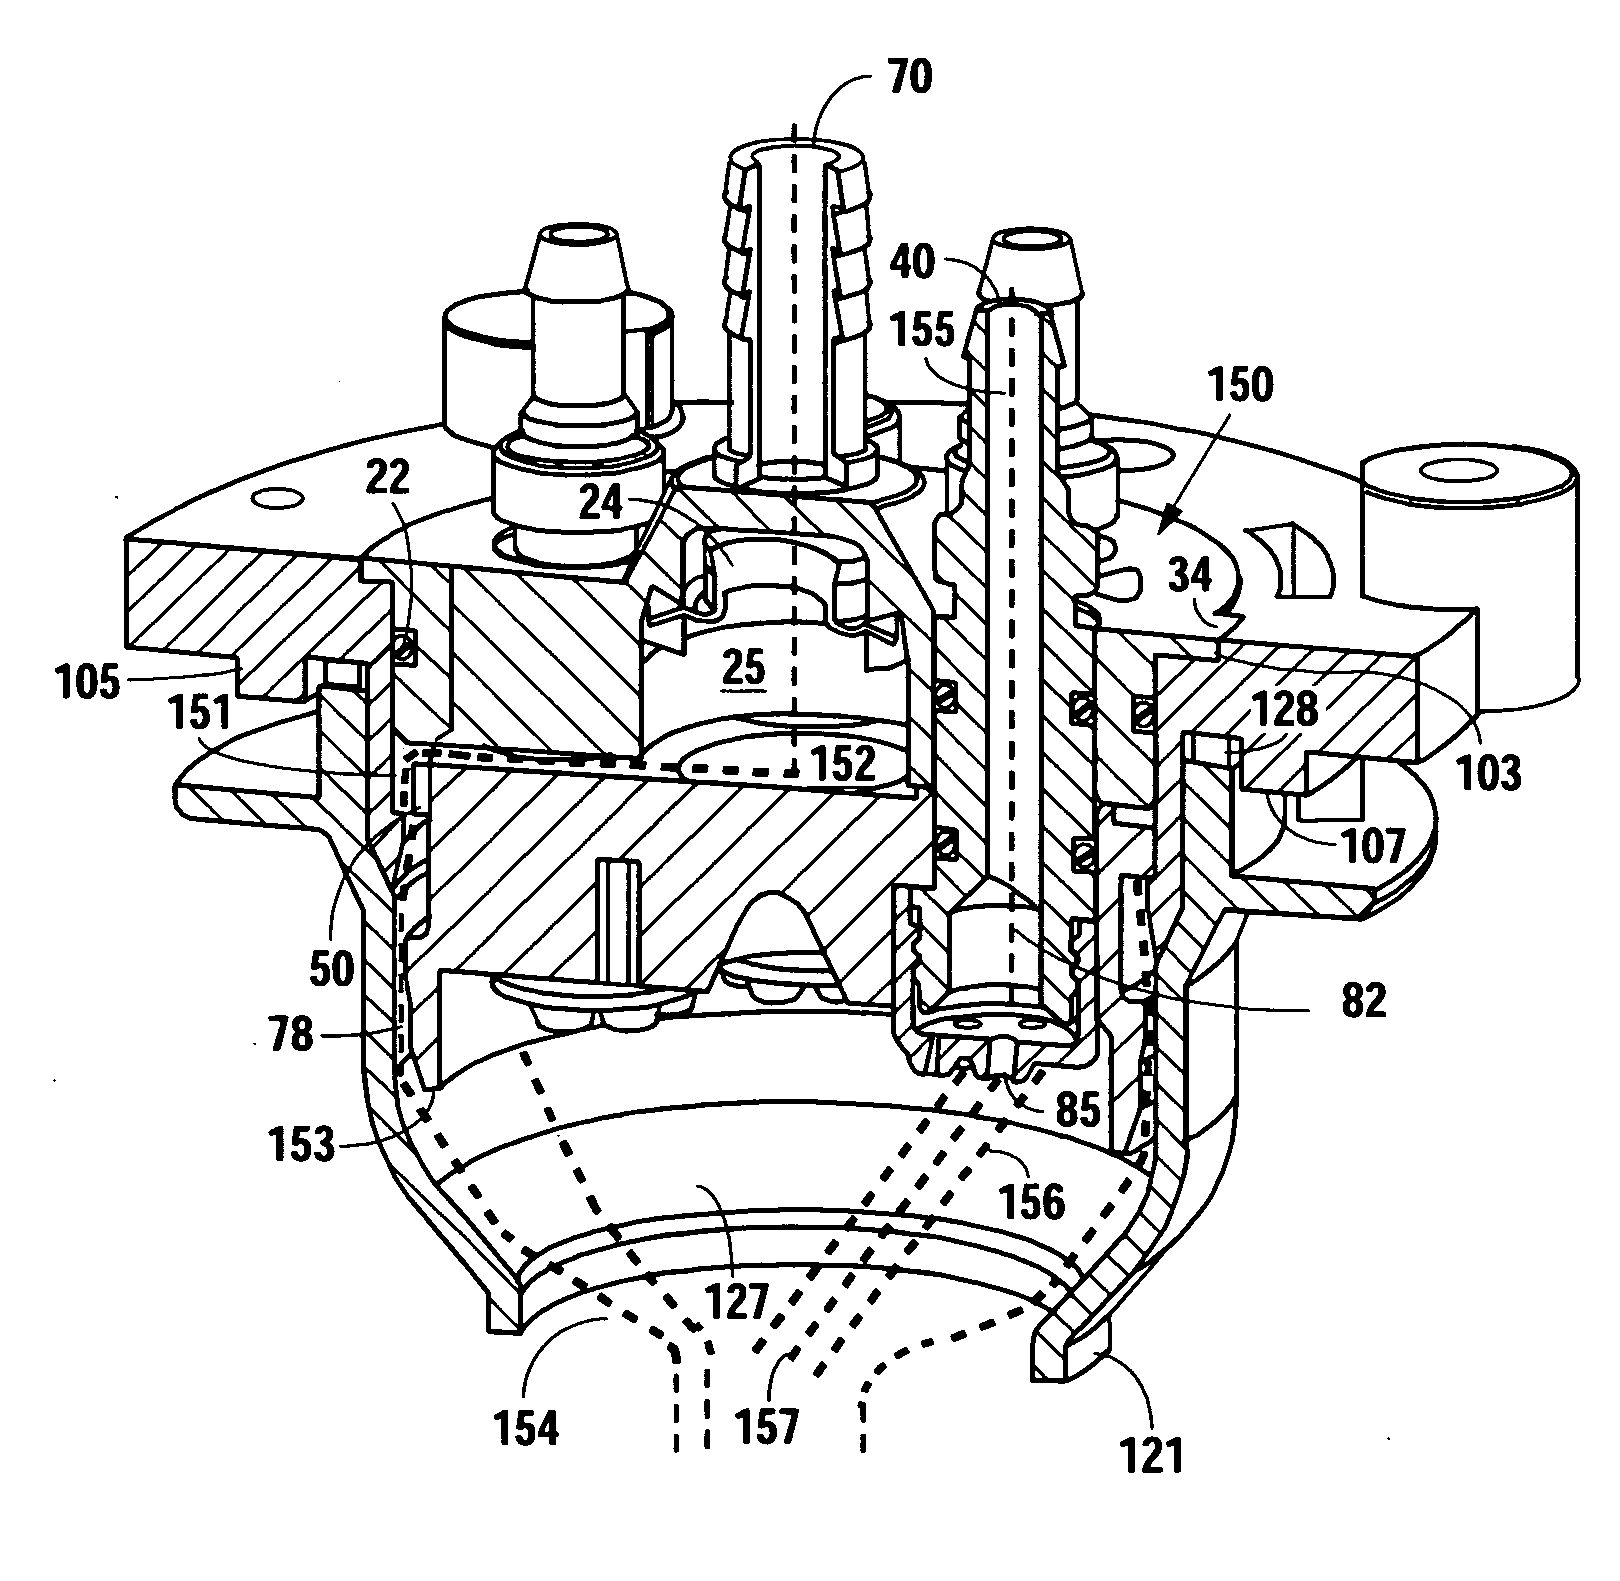 Method and apparatus for a multiple flavor beverage mixing nozzle